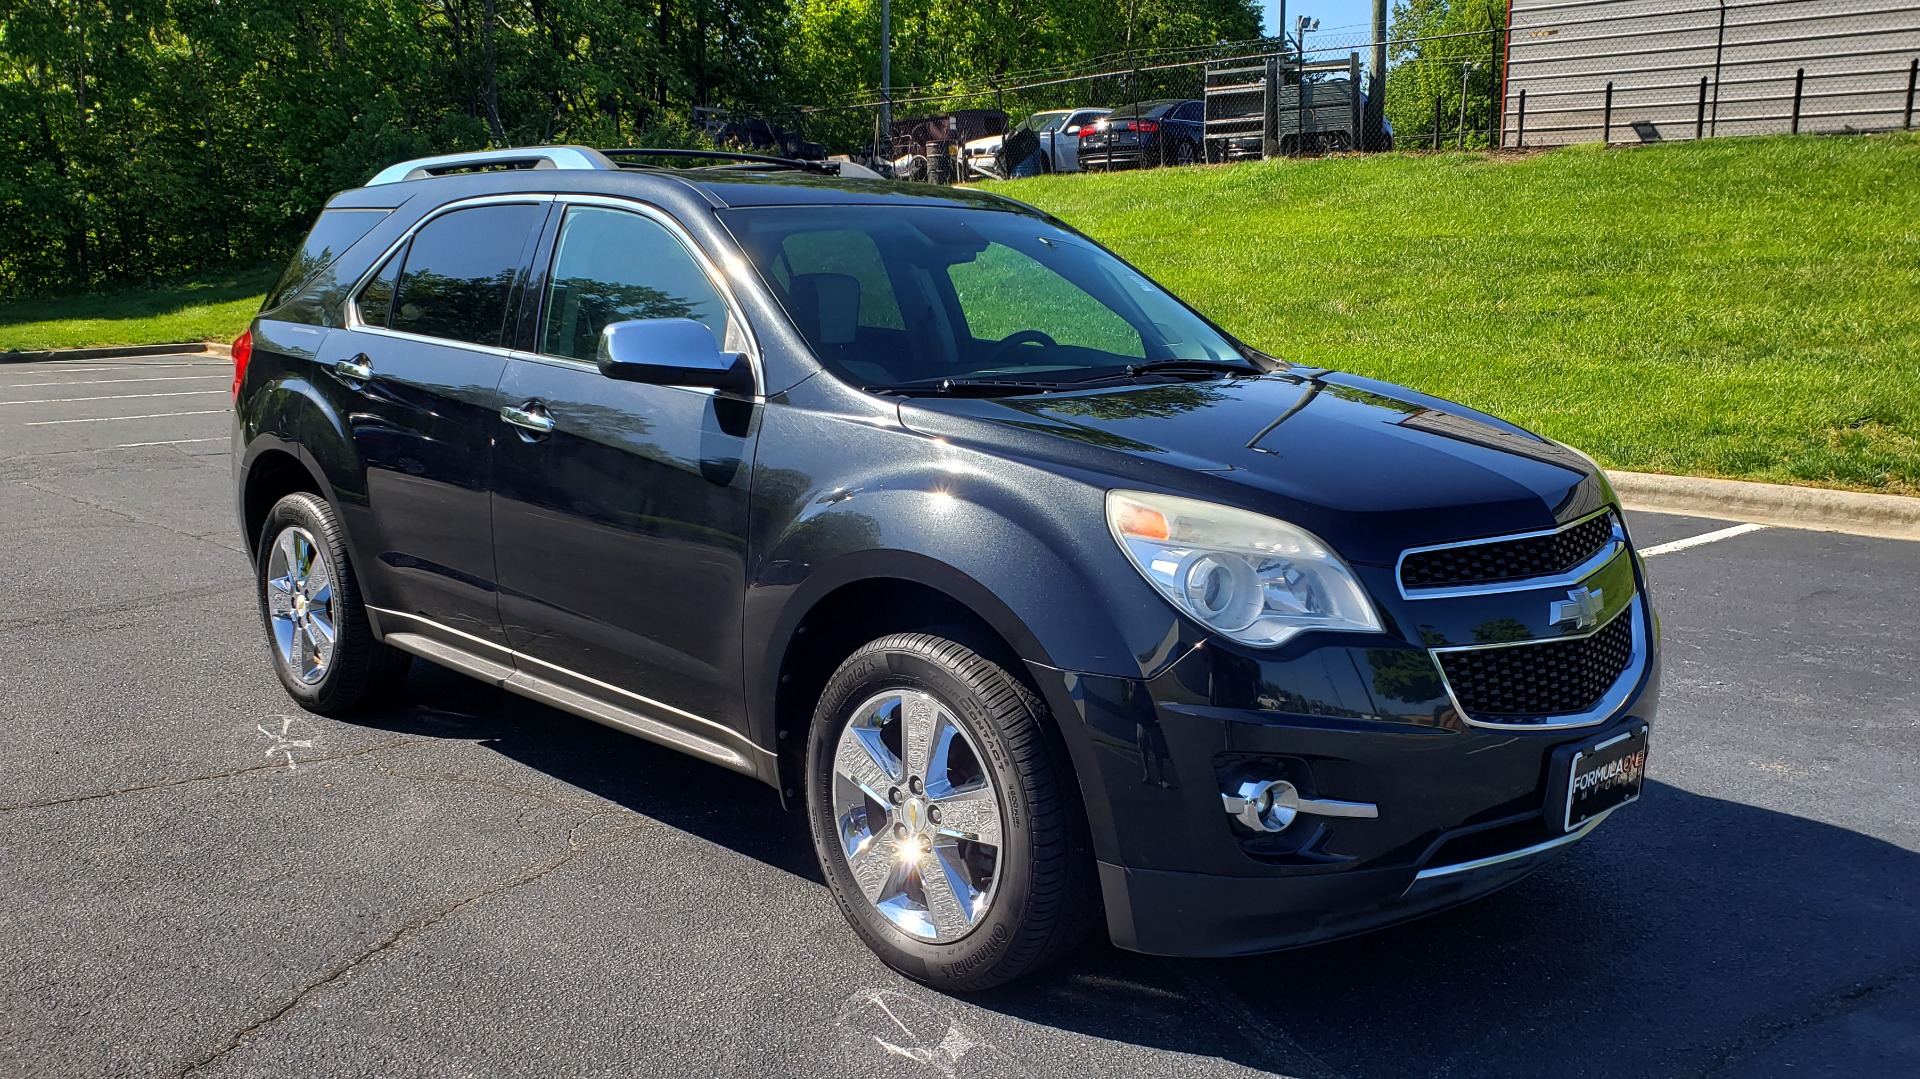 Used 2012 Chevrolet EQUINOX LTZ / FWD / 3.0L V6 / NAV / SUNROOF / PIONEER SND / REARVIEW for sale Sold at Formula Imports in Charlotte NC 28227 4